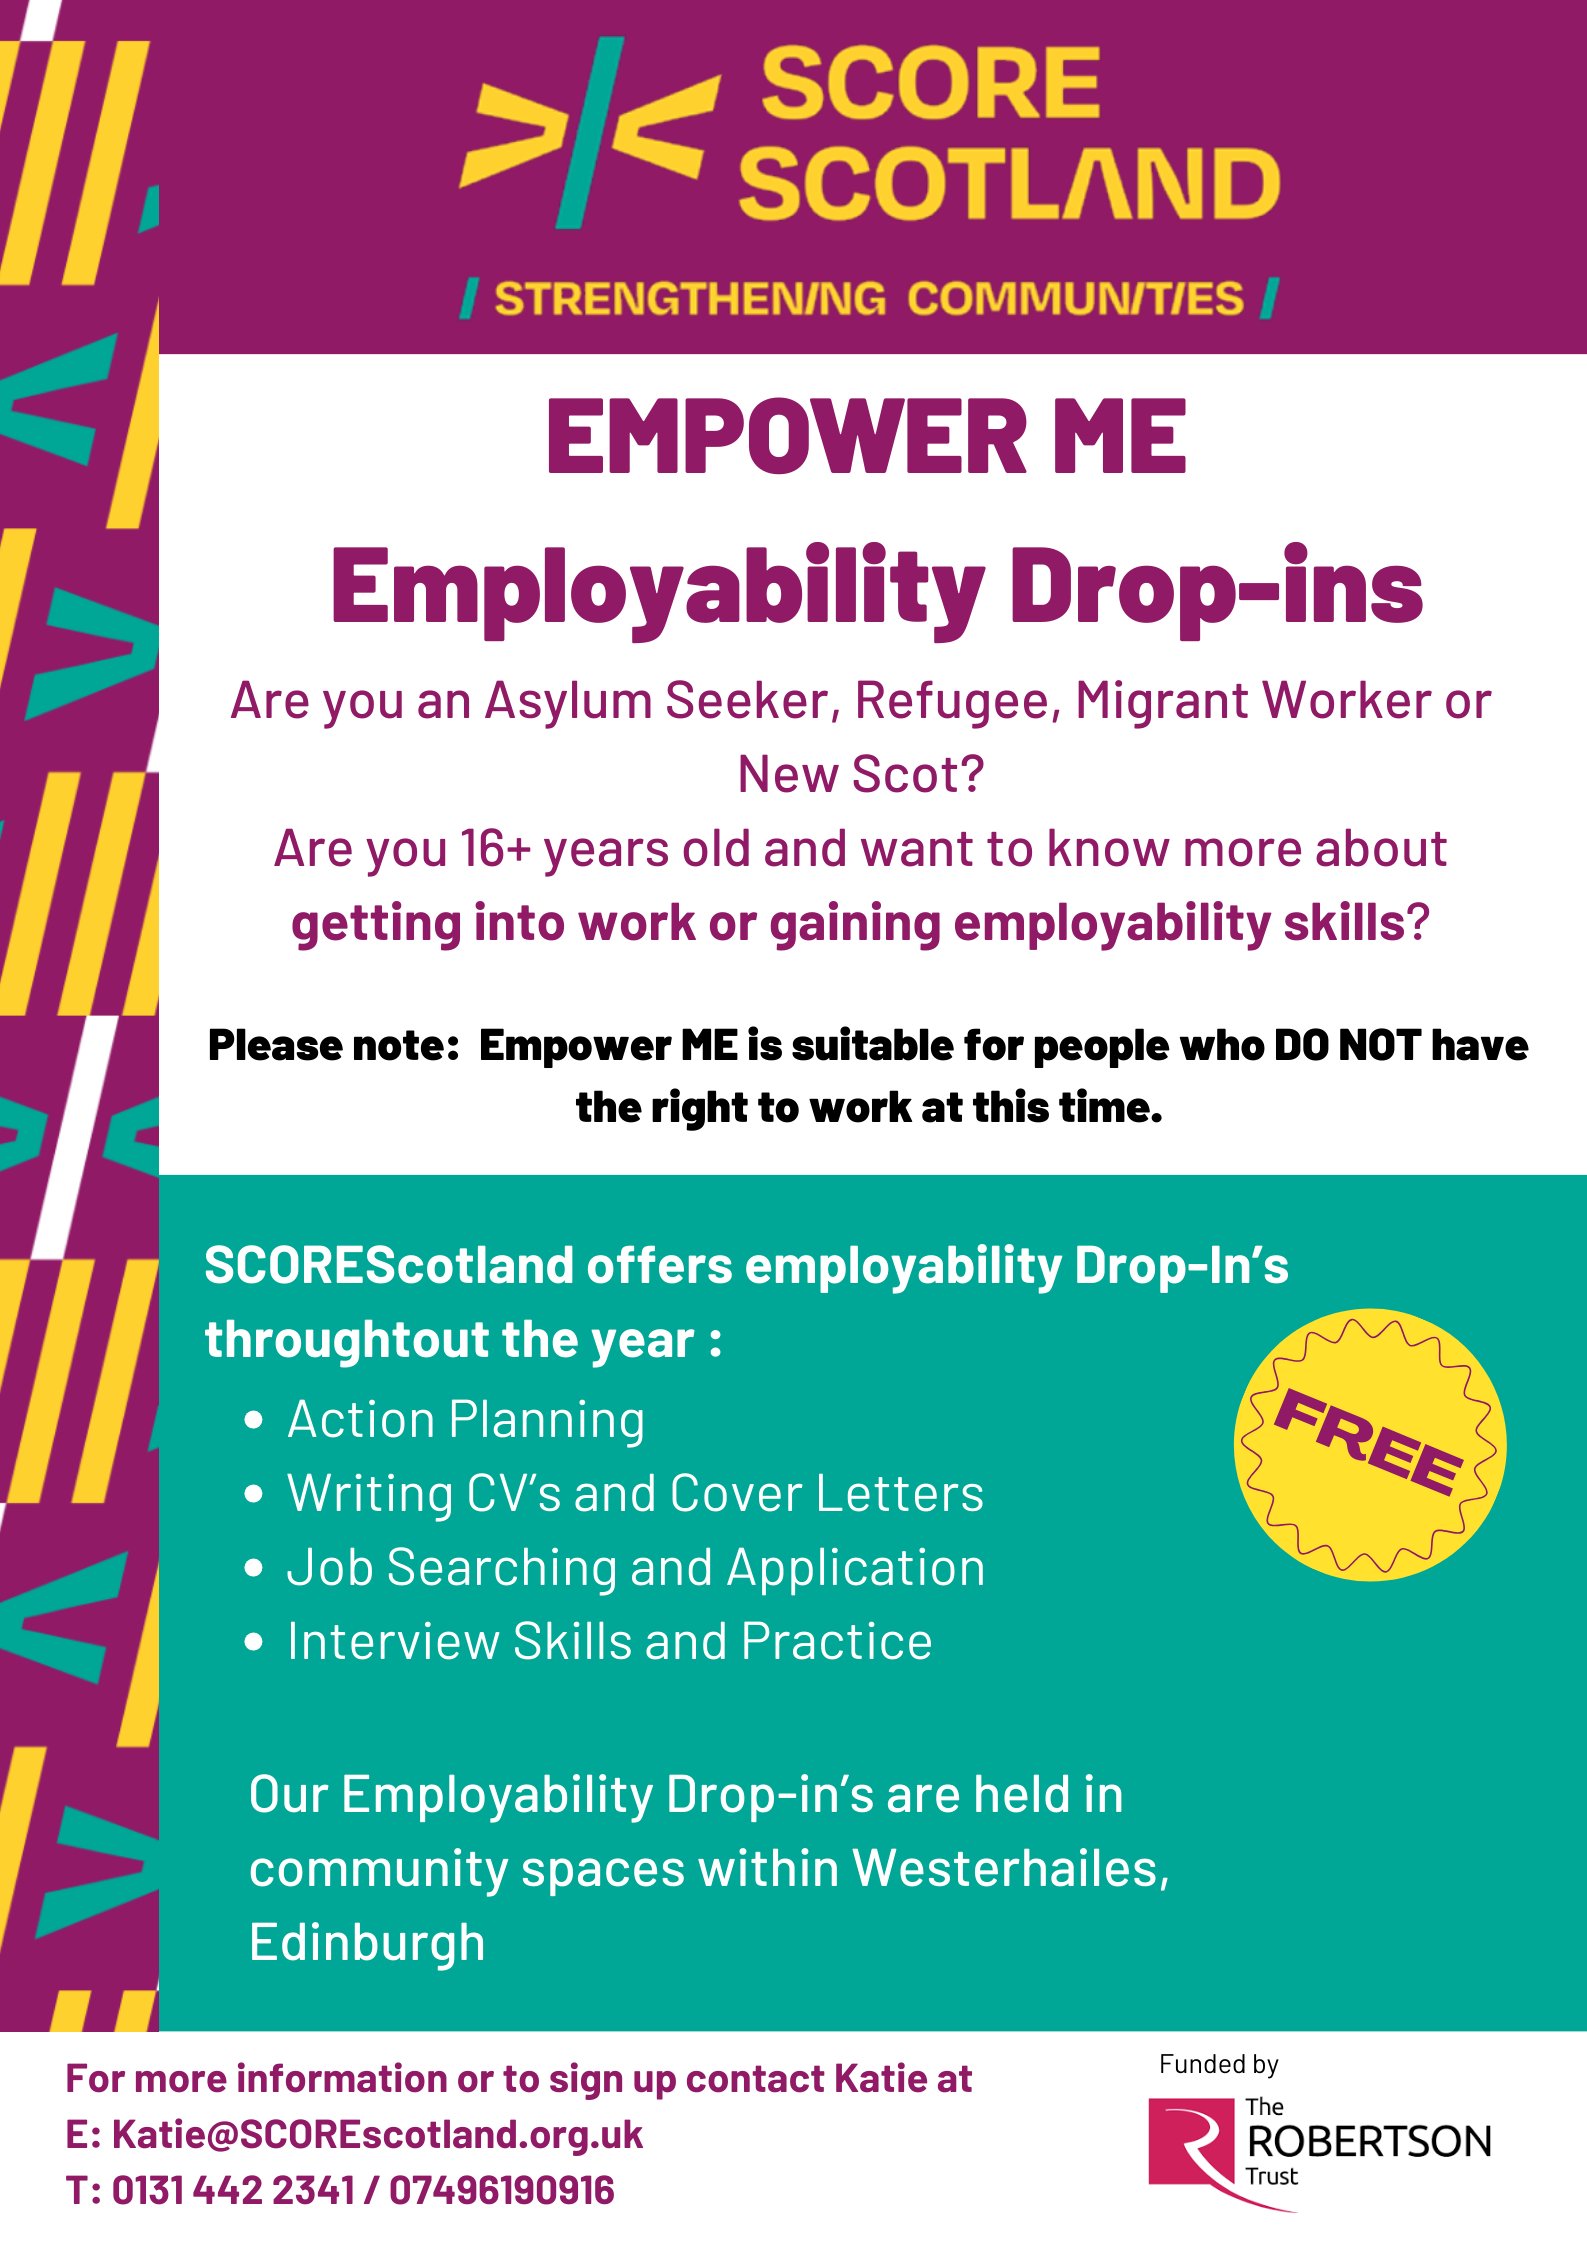 SCOREscotland empower me drop in poster featured image